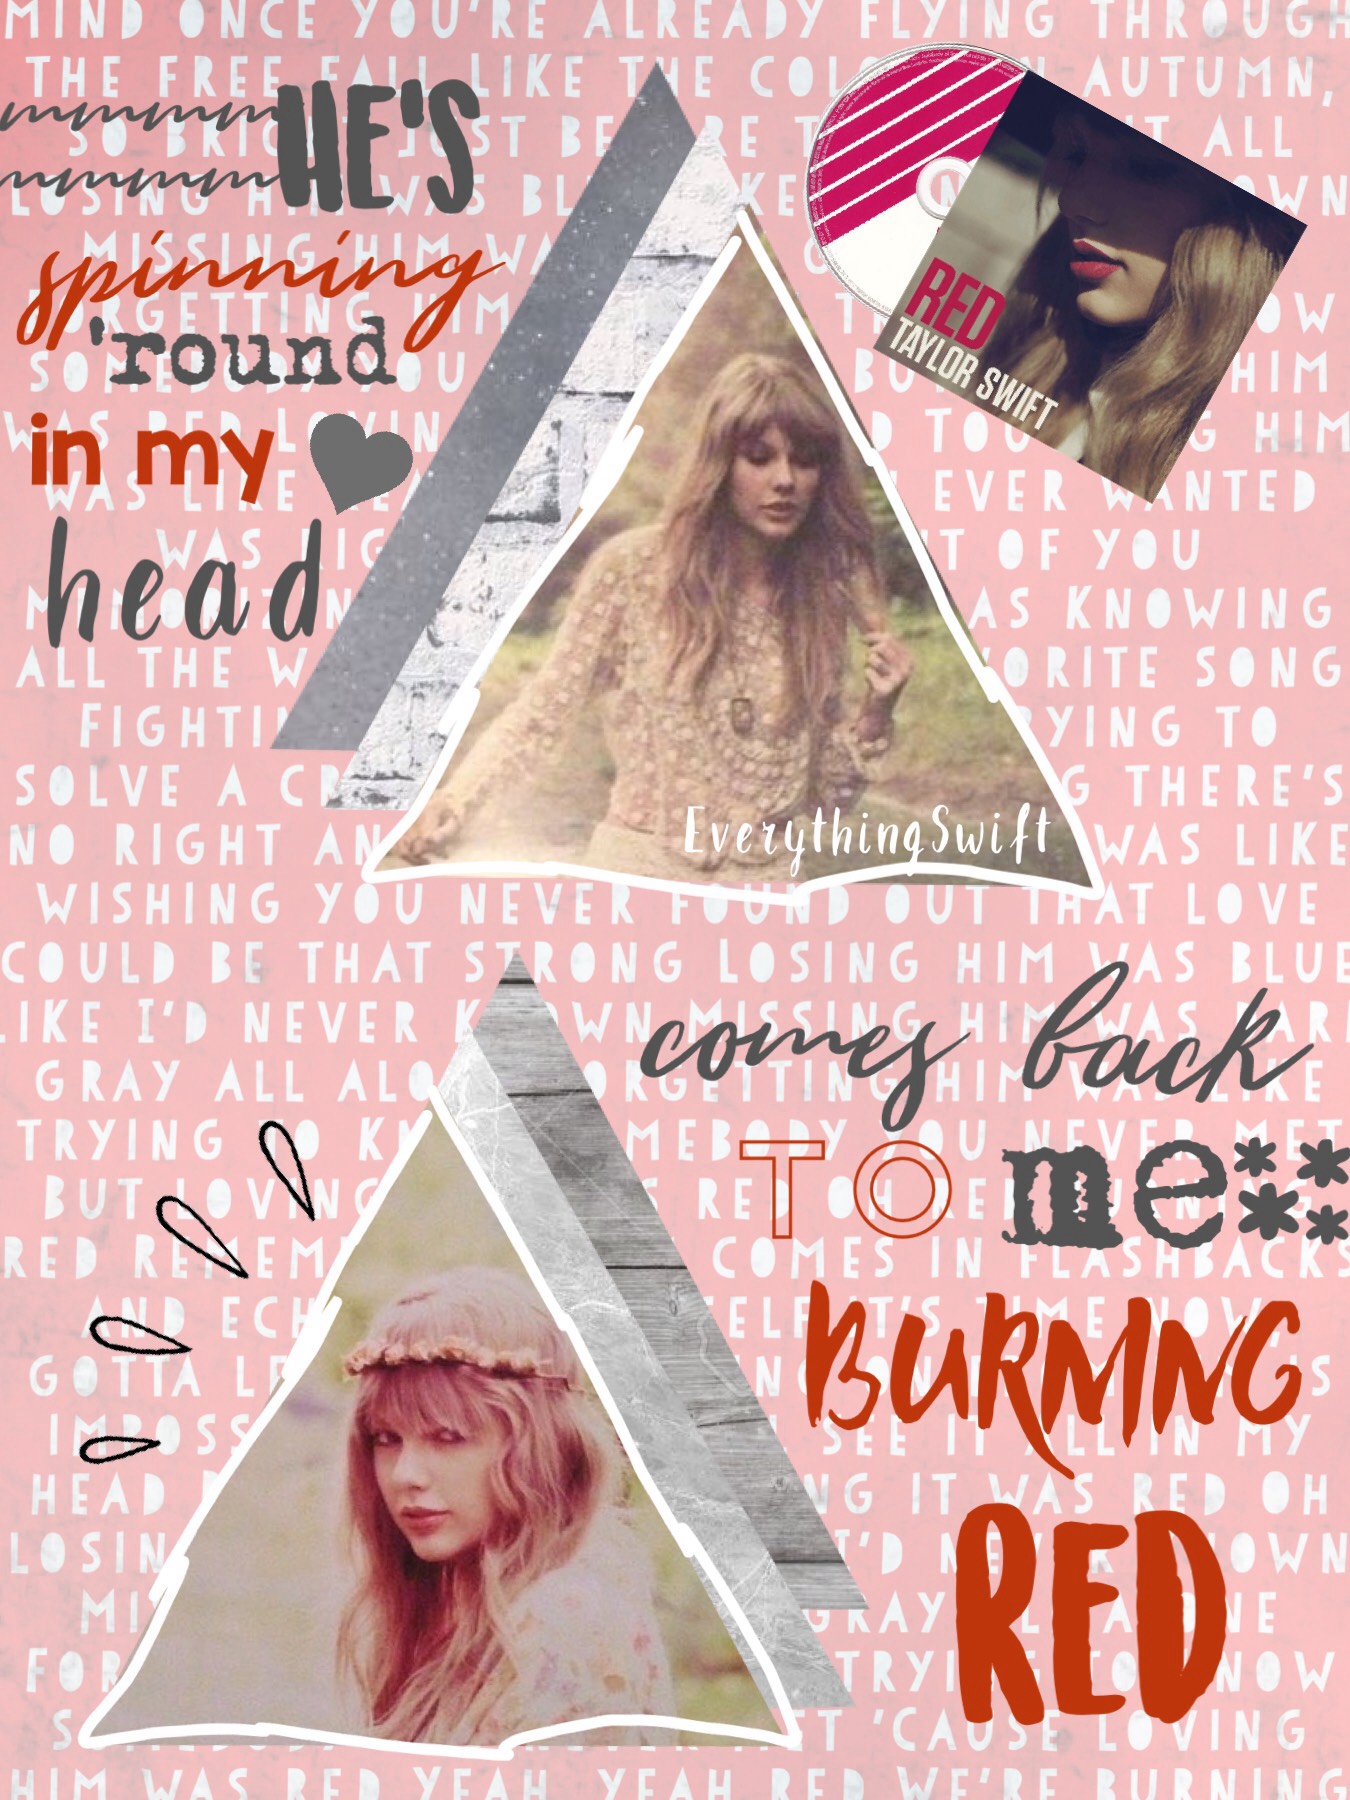 I know most of my recent collages are about Red but LYRICAL MASTERPIECE! Tap!💕
QOTD: What is your fav part about December?
AOTD: TAYLOR'S B-DAY 🎉 AND CHRISTMAS🎄 AND SNOW ❄️!!!!!!